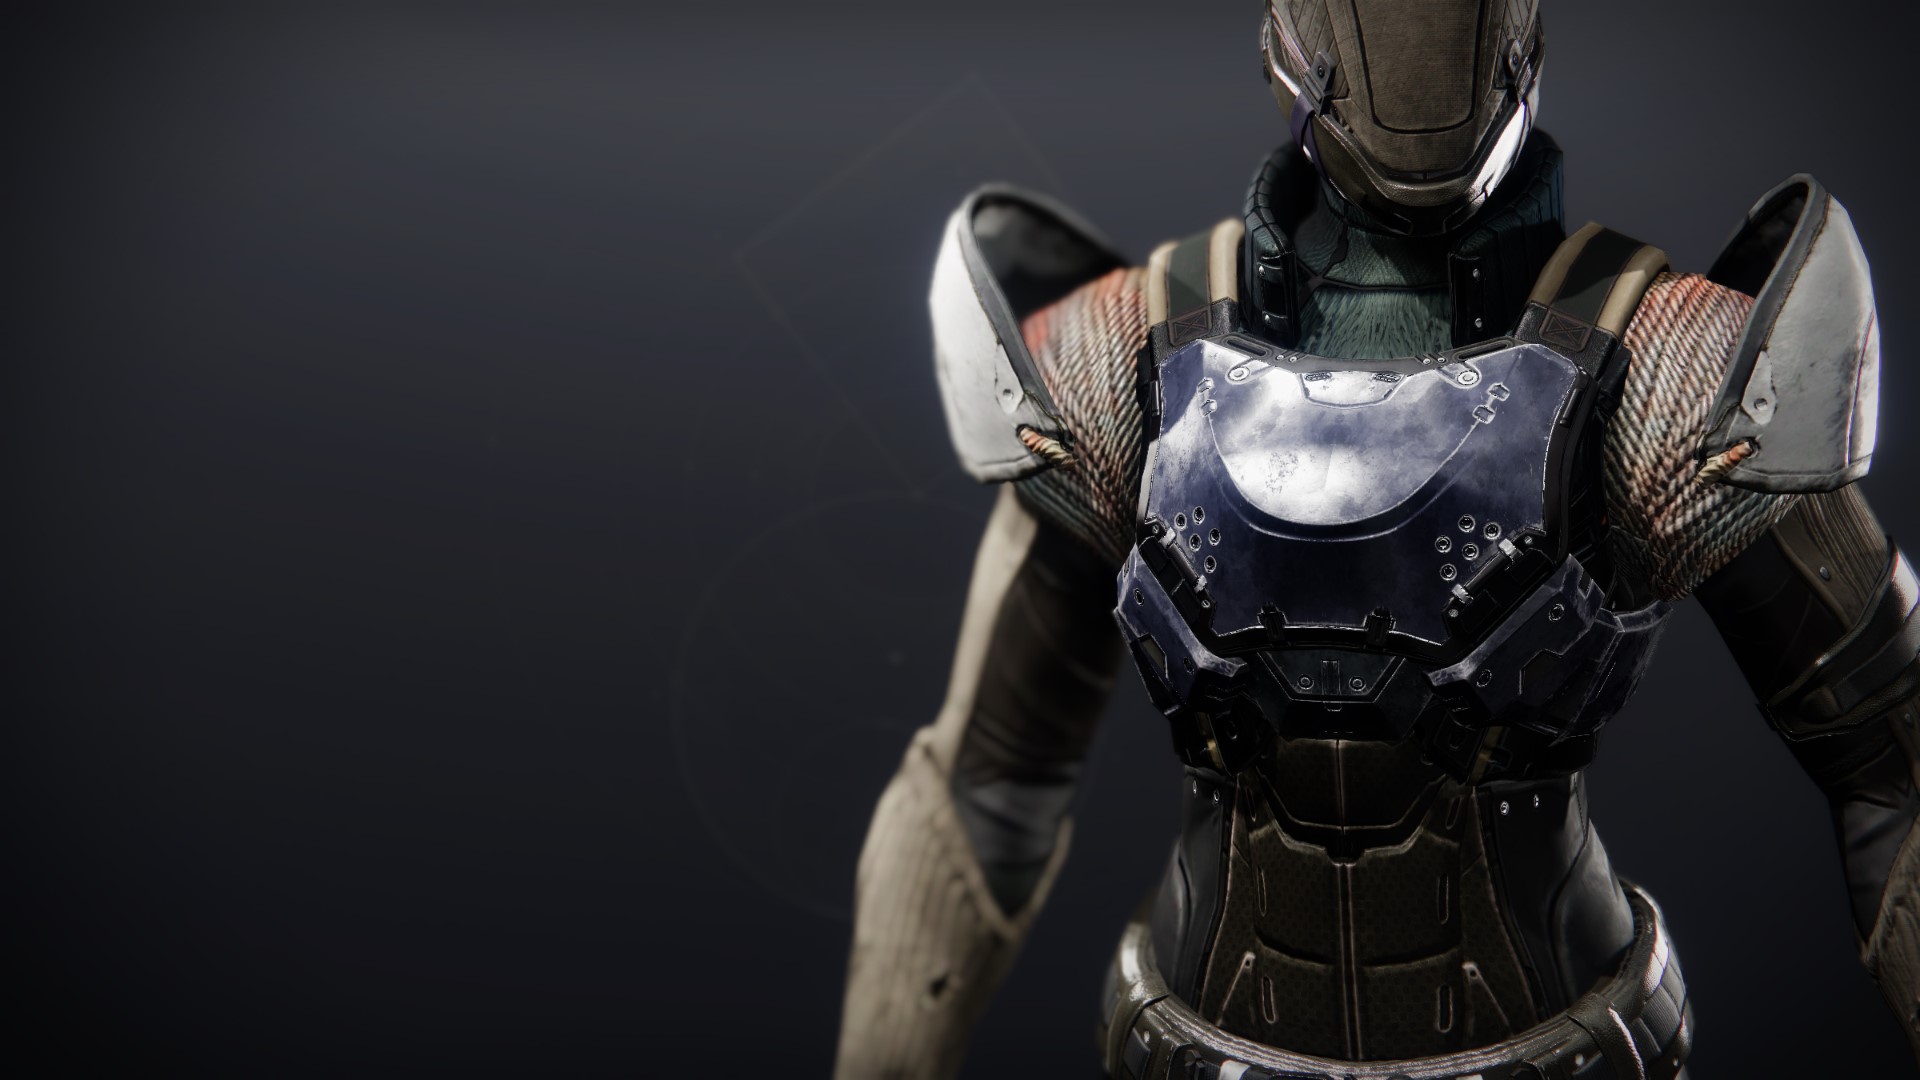 An in-game render of the Prodigal Cuirass.